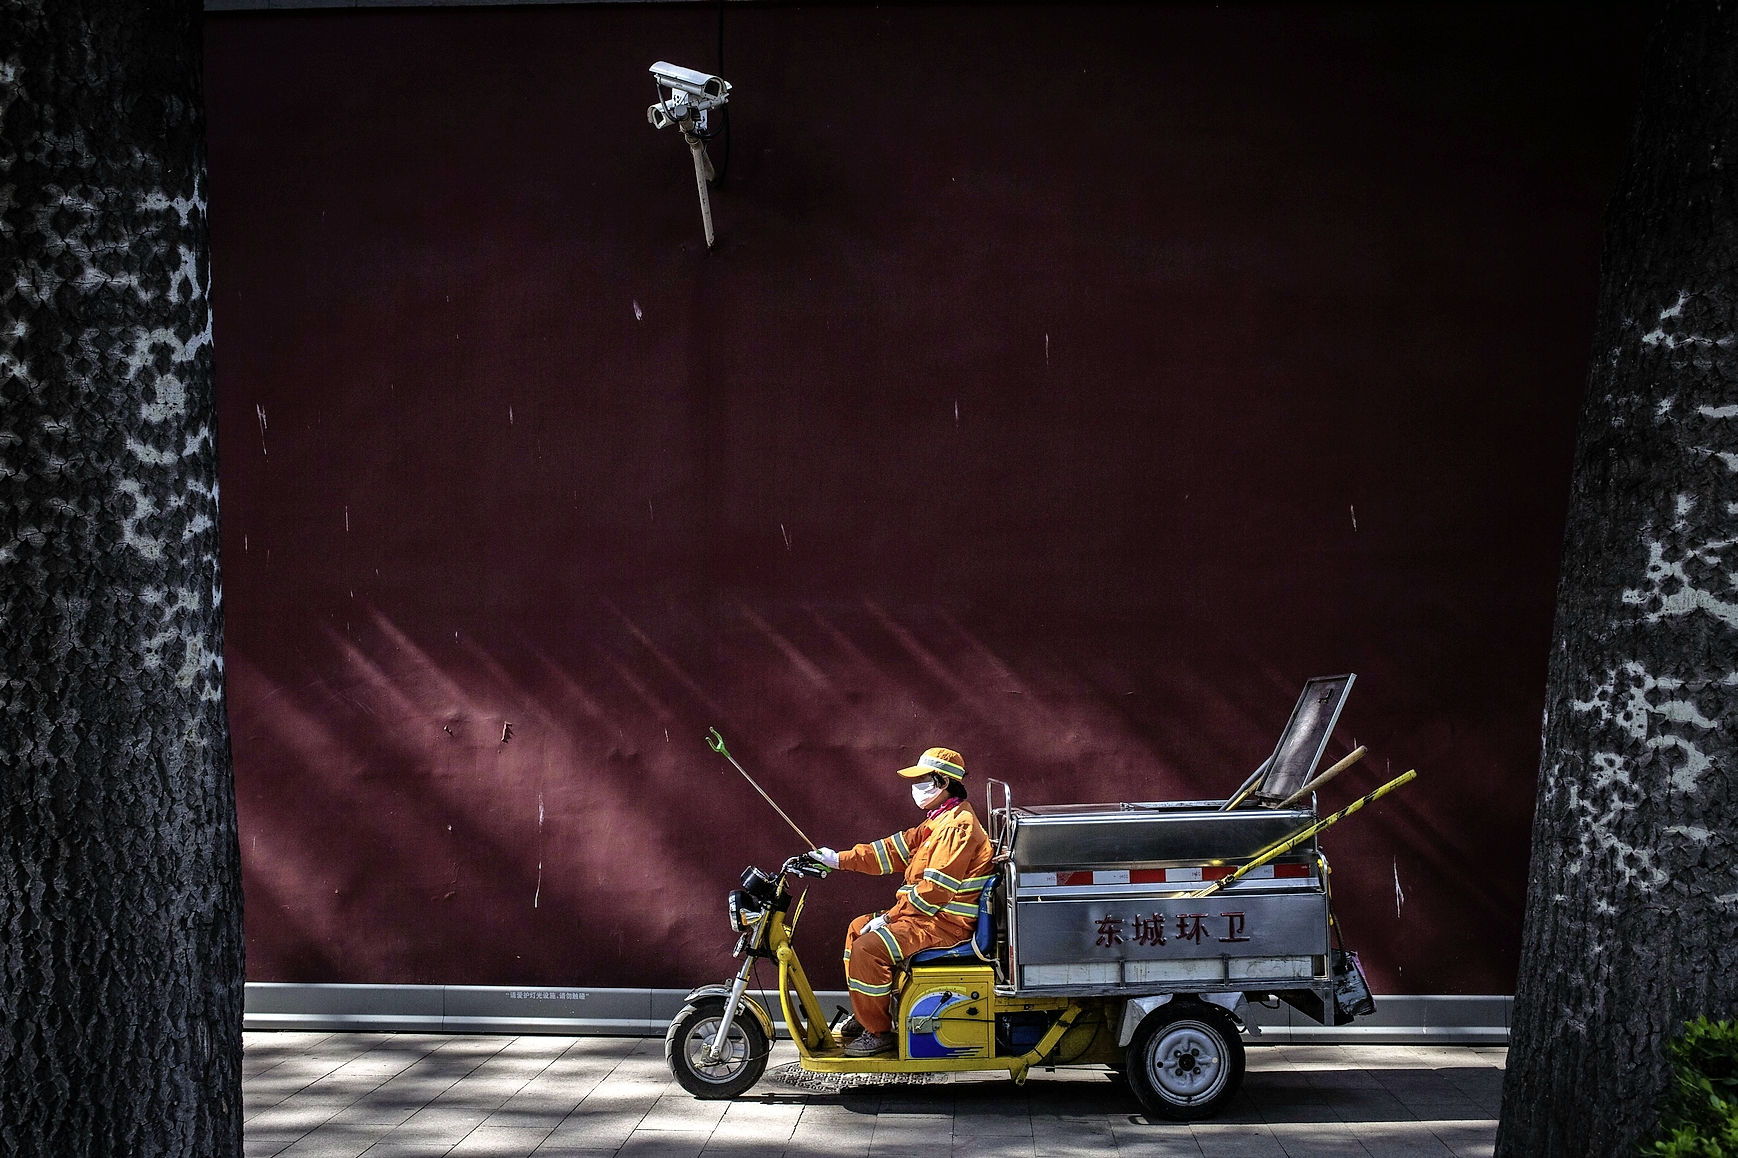 epa06007540 A municipal worker cleans the street as a security camera observes the area next to Tiananmen Square in Beijing, China, 03 June 2017. The 28-year-anniversary of the 1989 Tiananmen Square military crackdown falls on 04 June and Chinese authorities have raised the security level in the area drastically. Between 15 April and 04 June 1989, students, intellectuals, and activists engaged in a series of demonstrations against the Chinese Communist Party and although the protests took place all over the country, they centered on Tiananmen Square in Beijing, where the subsequent crackdown by authorities caused a vast number of civilians' deaths and injuries.  EPA/ROMAN PILIPEY CHINA TIANANMEN SQUARE ANNIVERSARY